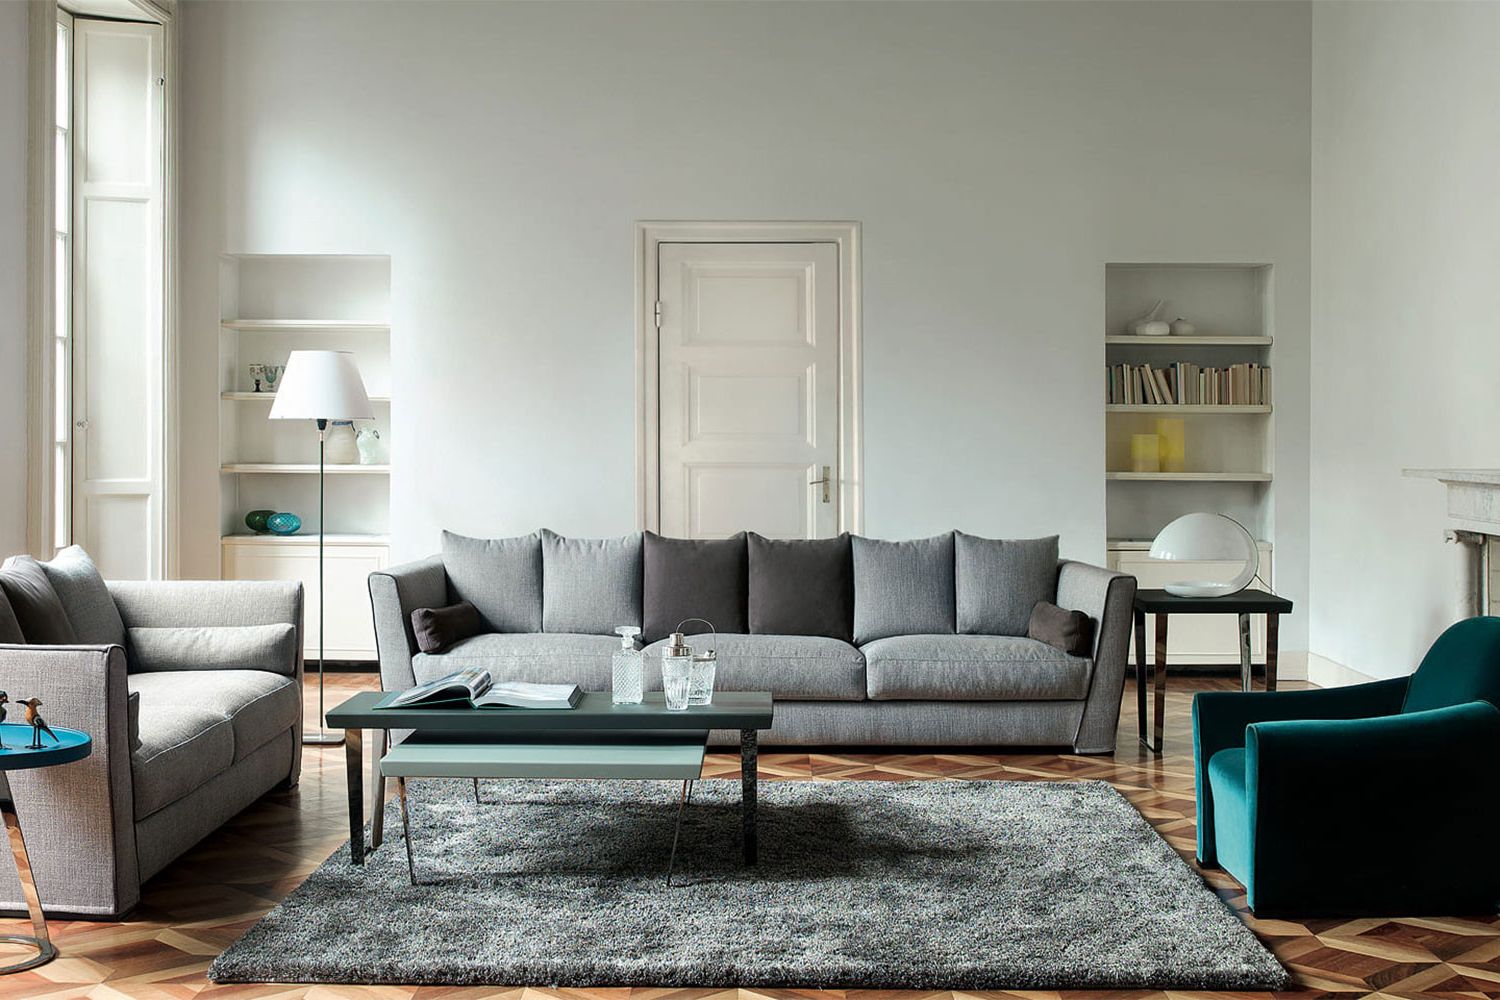 2, 3 Or 4 Seater Pillow Back Sofa Quentin | Bodema Throughout Pillowback Sofa Sectionals (Gallery 10 of 20)